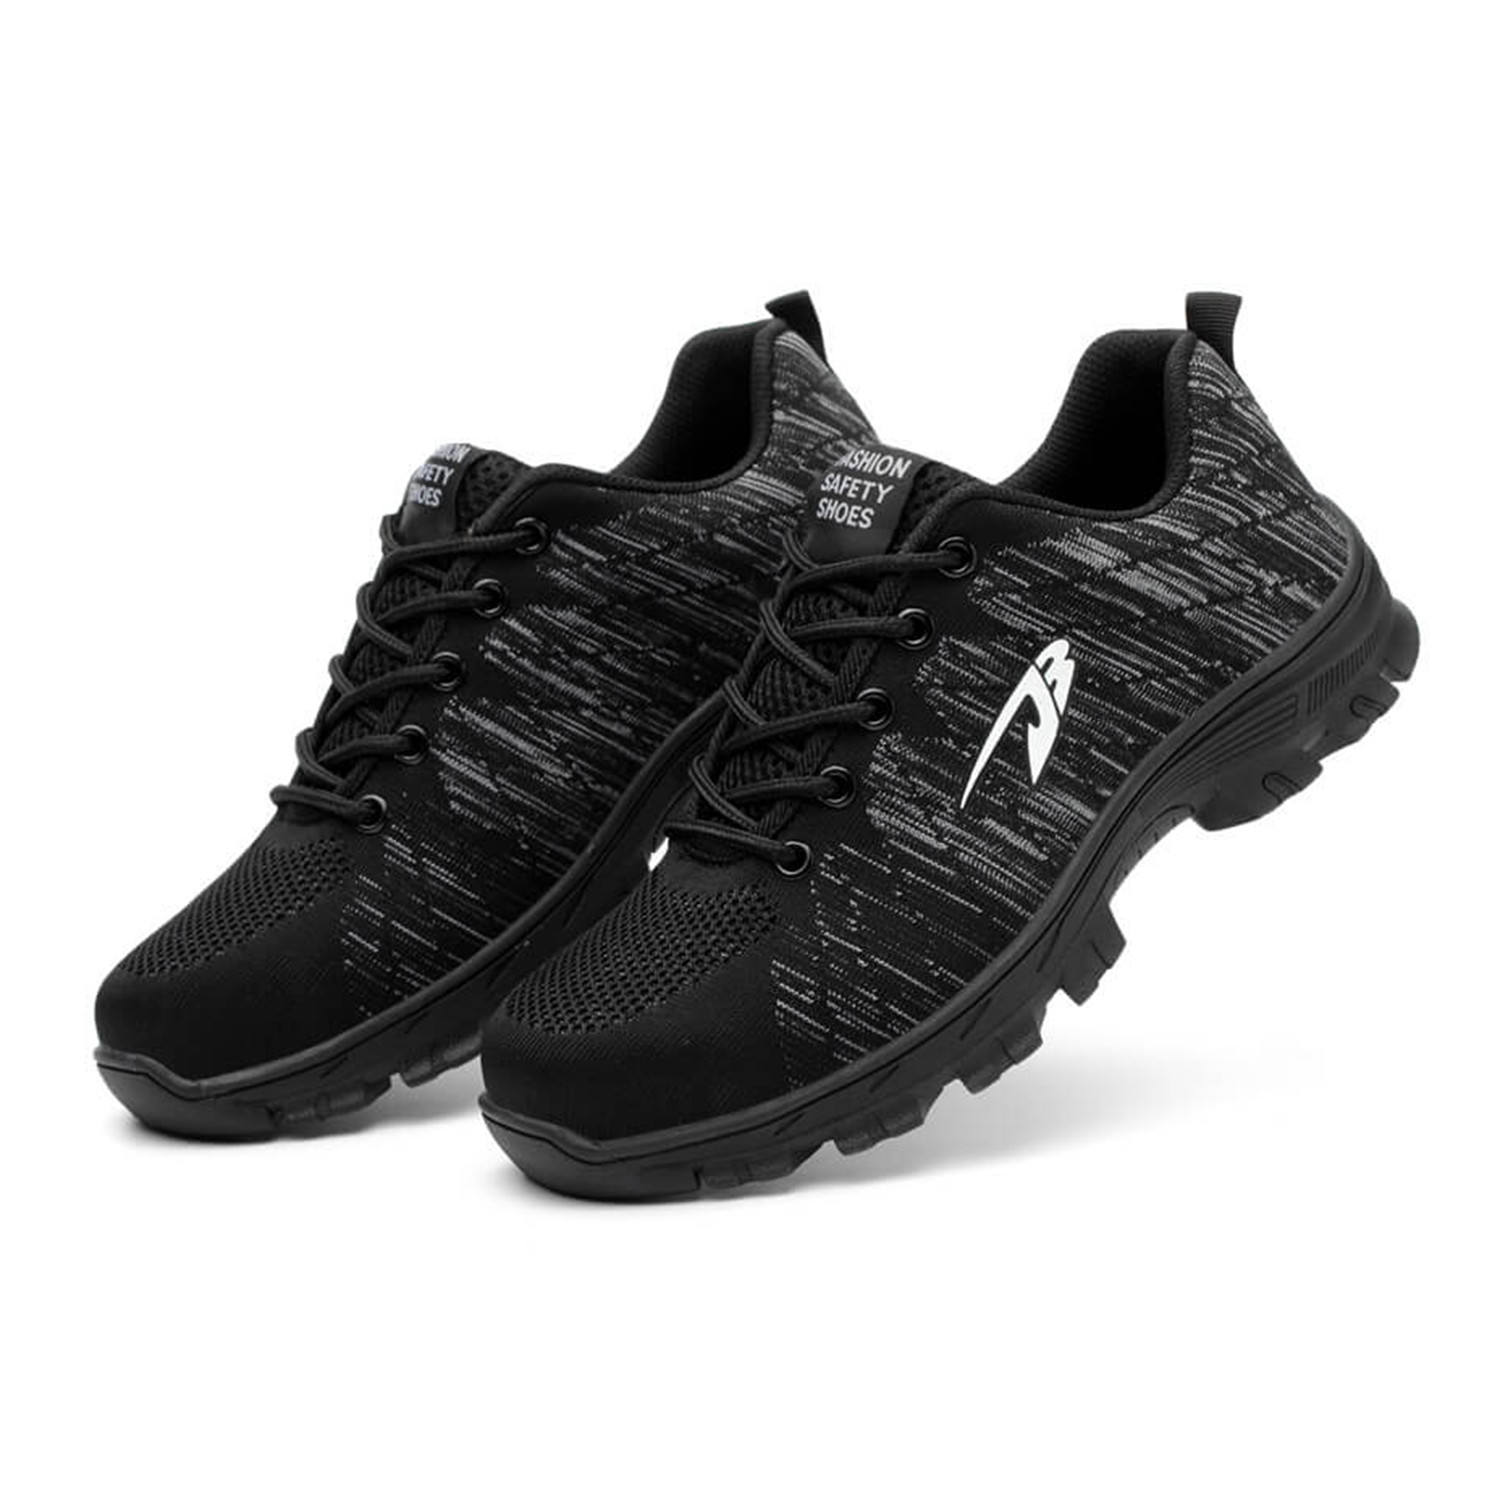 Airwalk // Black (US: 9-9.5) - Indestructible Shoes - Touch of Modern